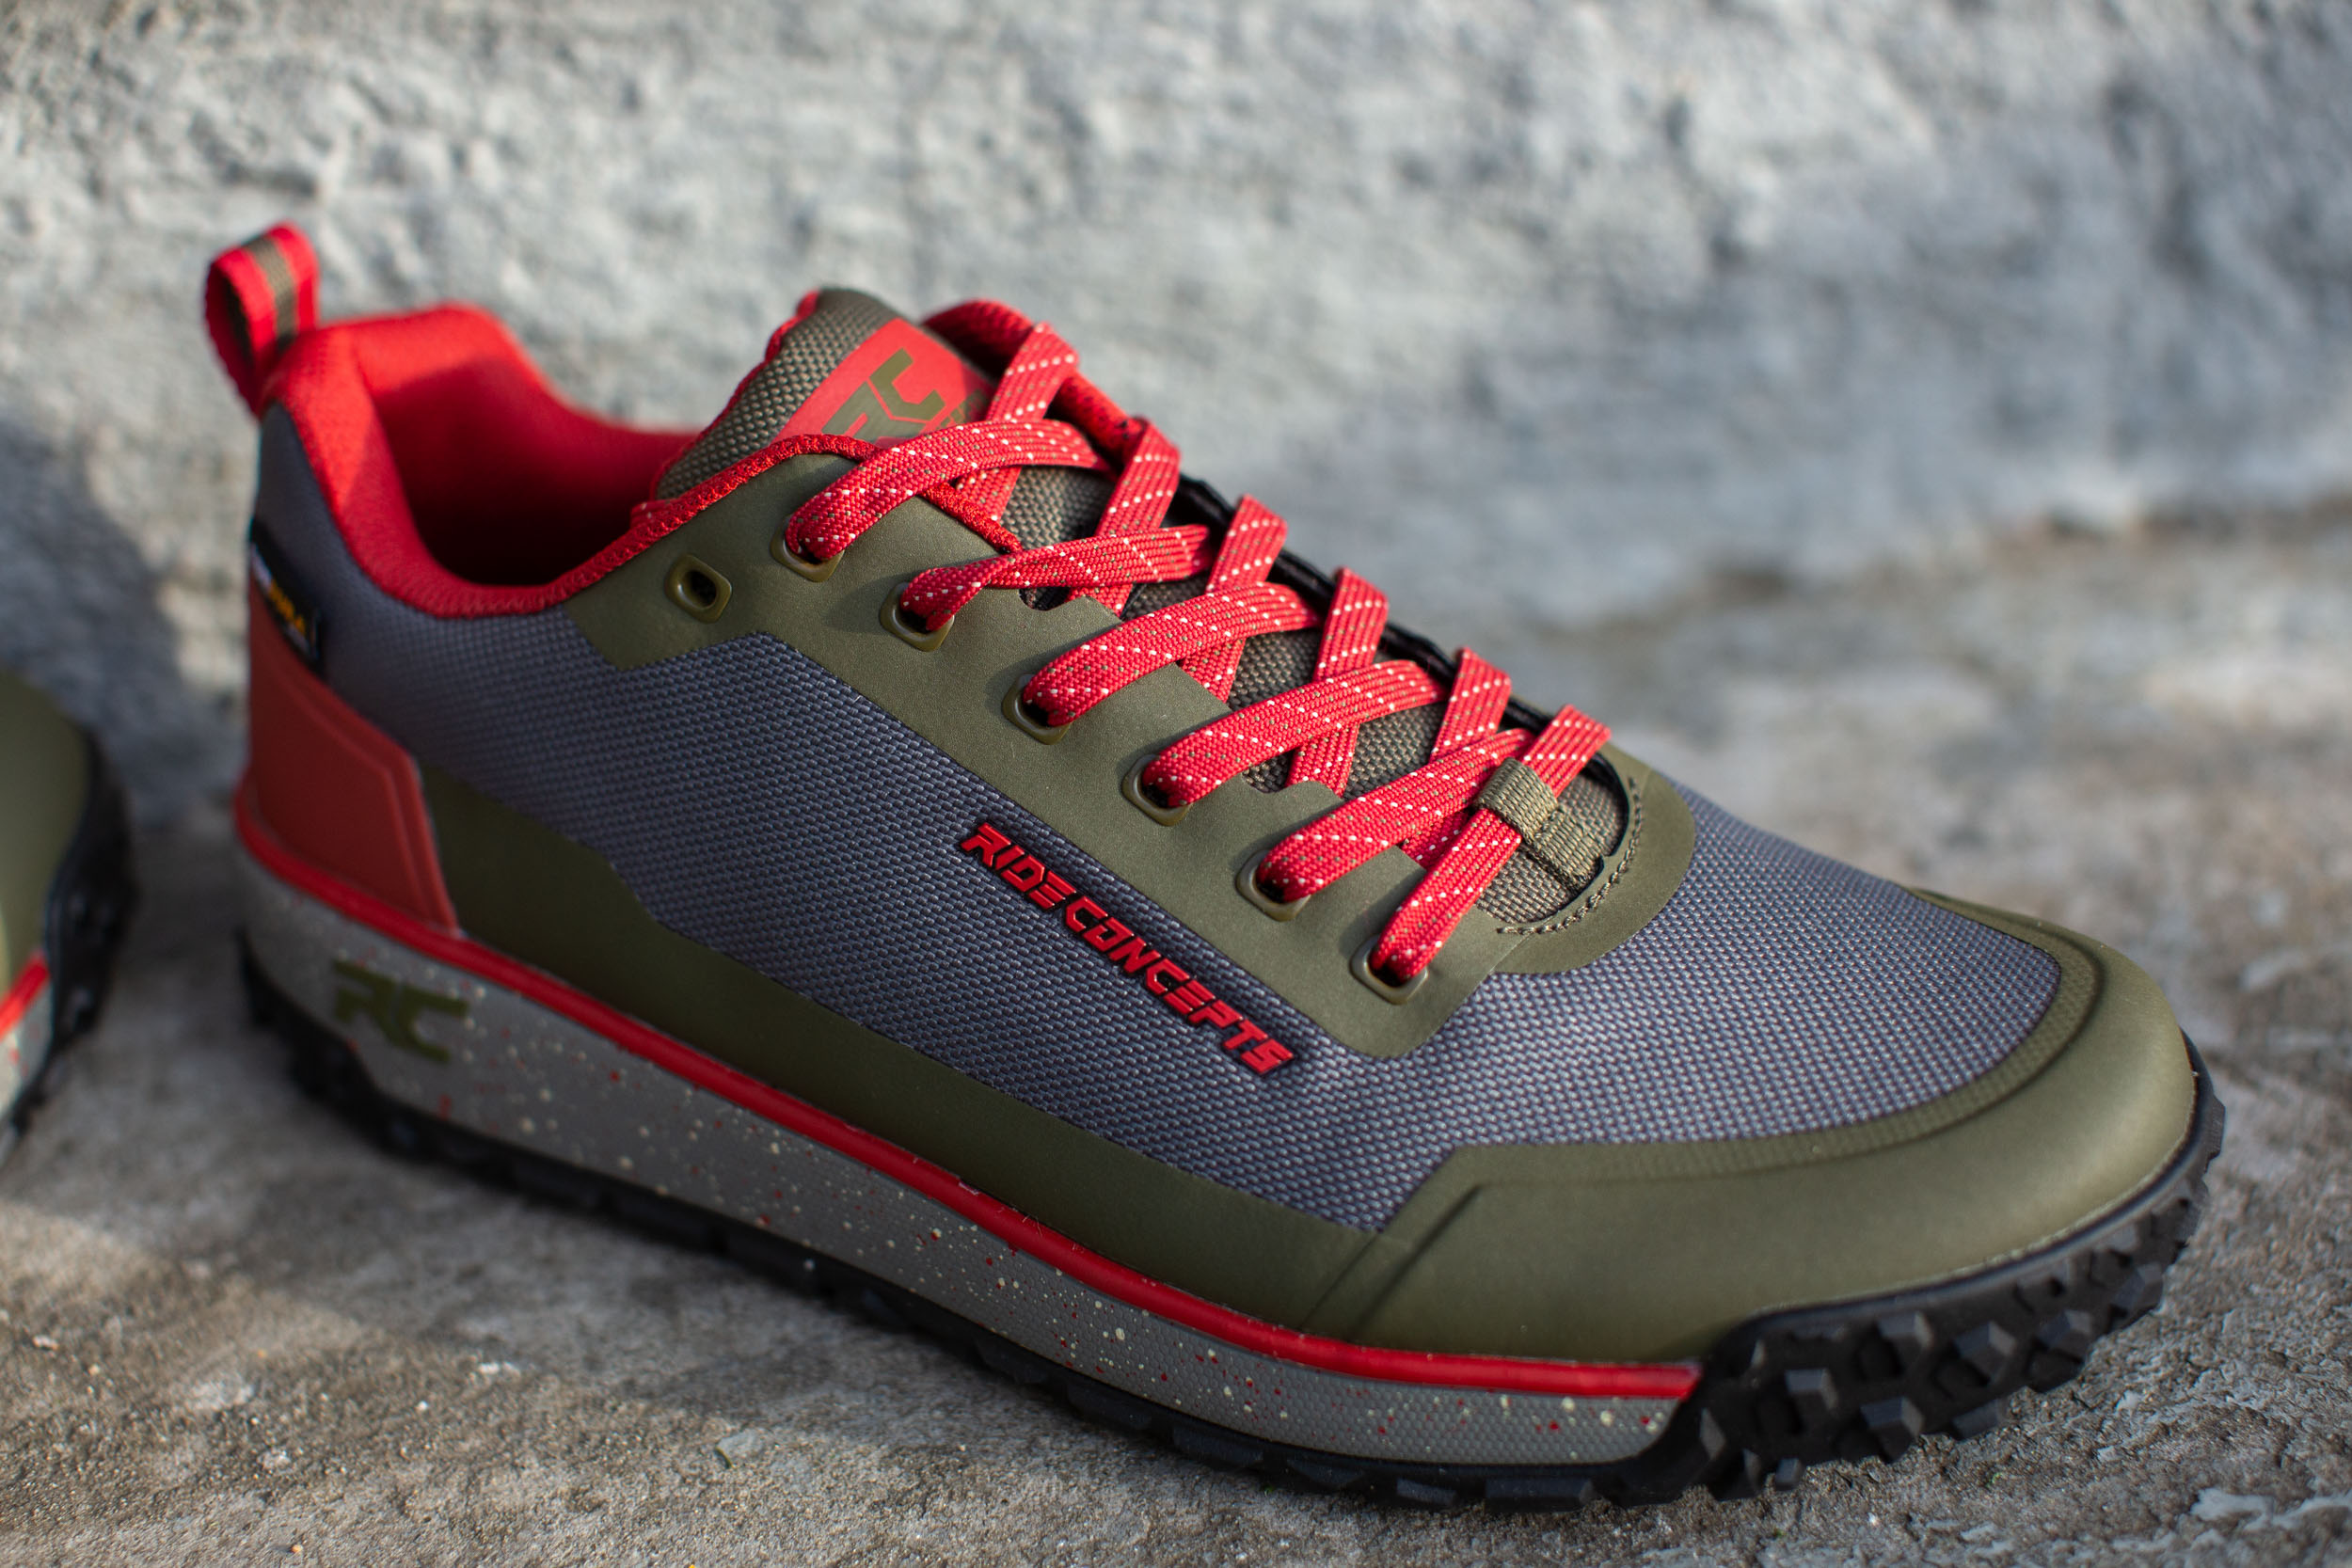 First Ride Review : Pete's Ride Concepts Tallac Clip Shoe.